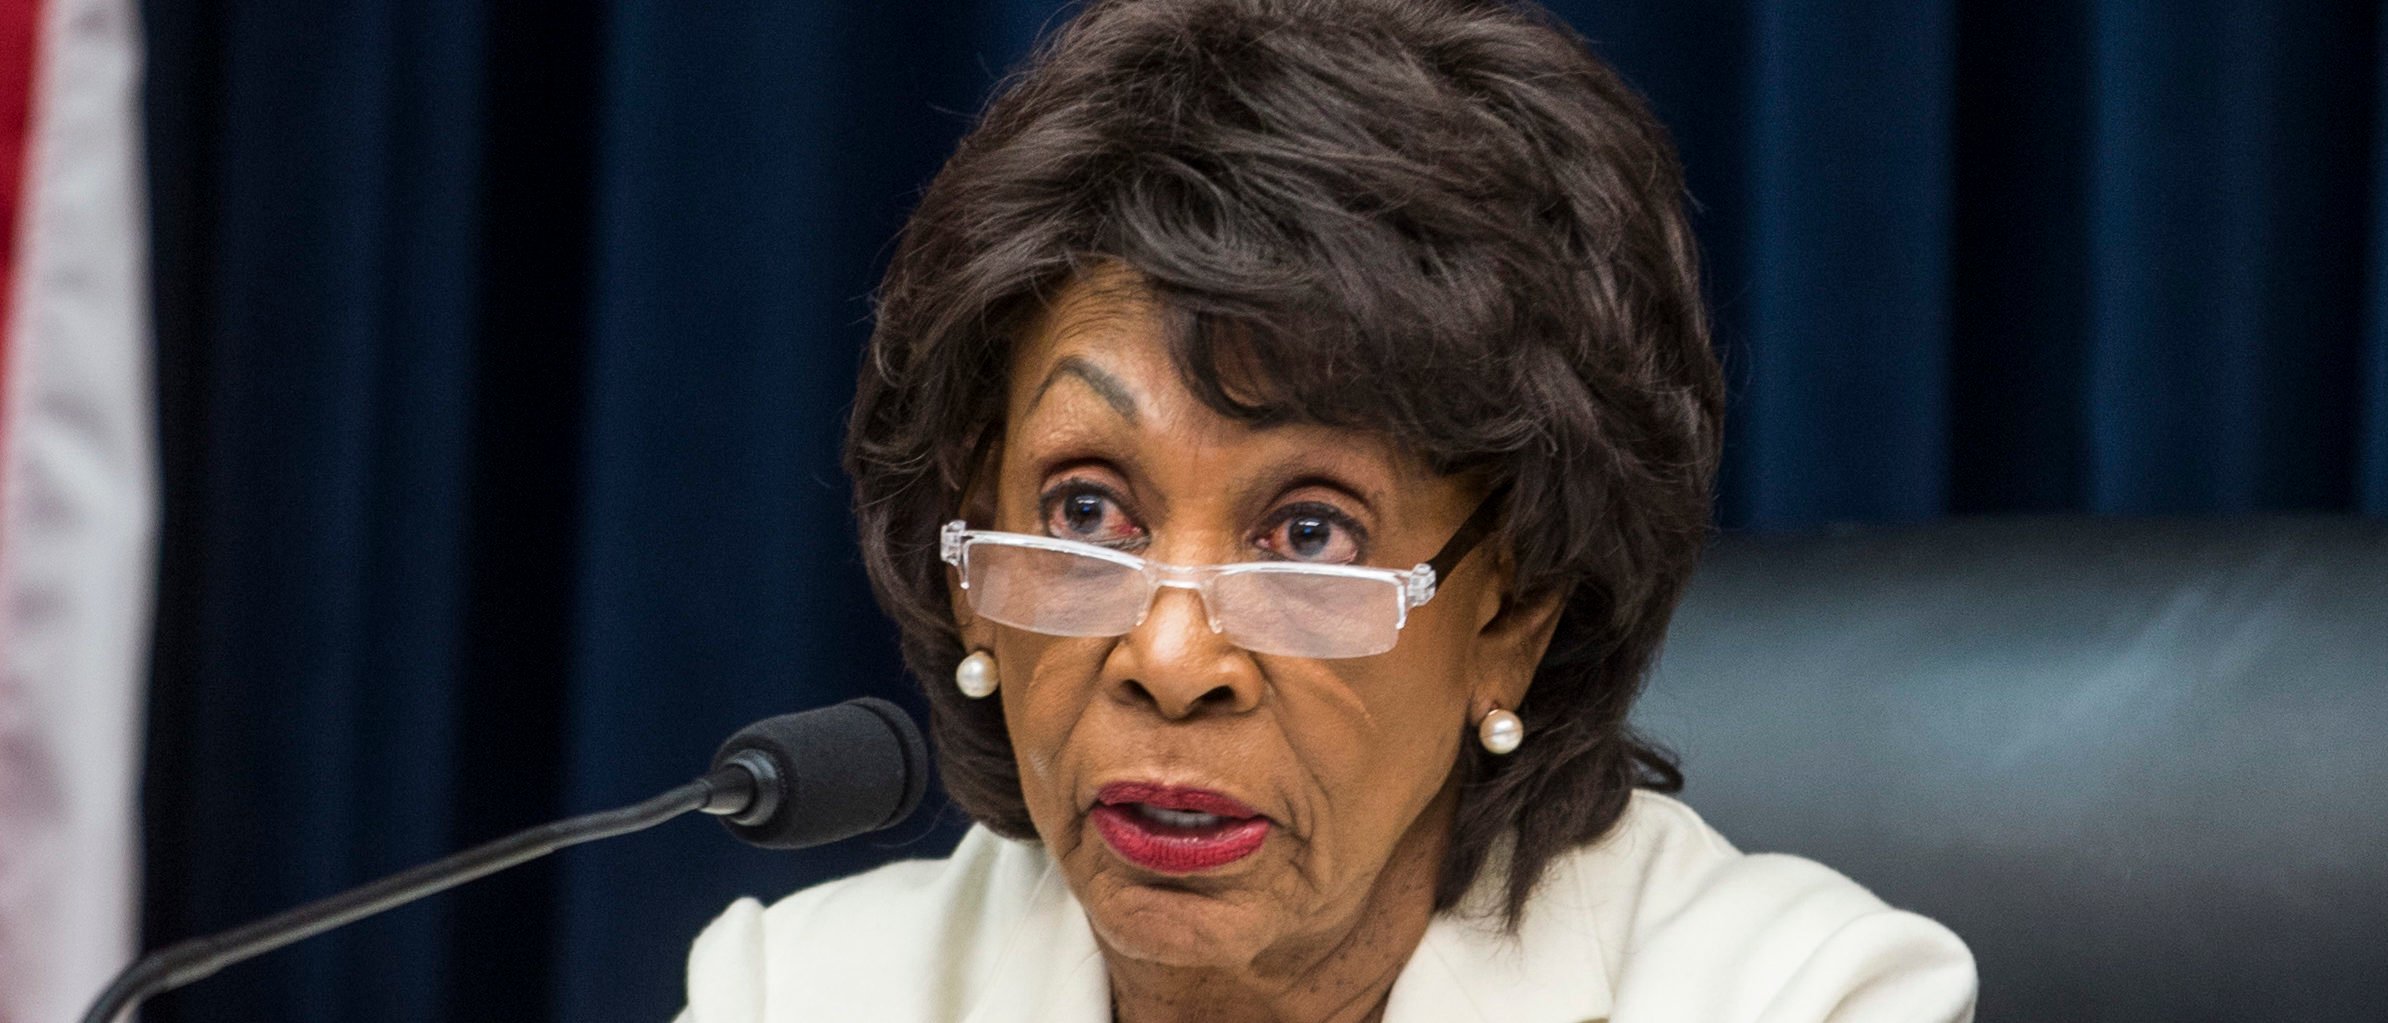 Maxine Waters Uses 4th of July to Show Her Disdain for the US